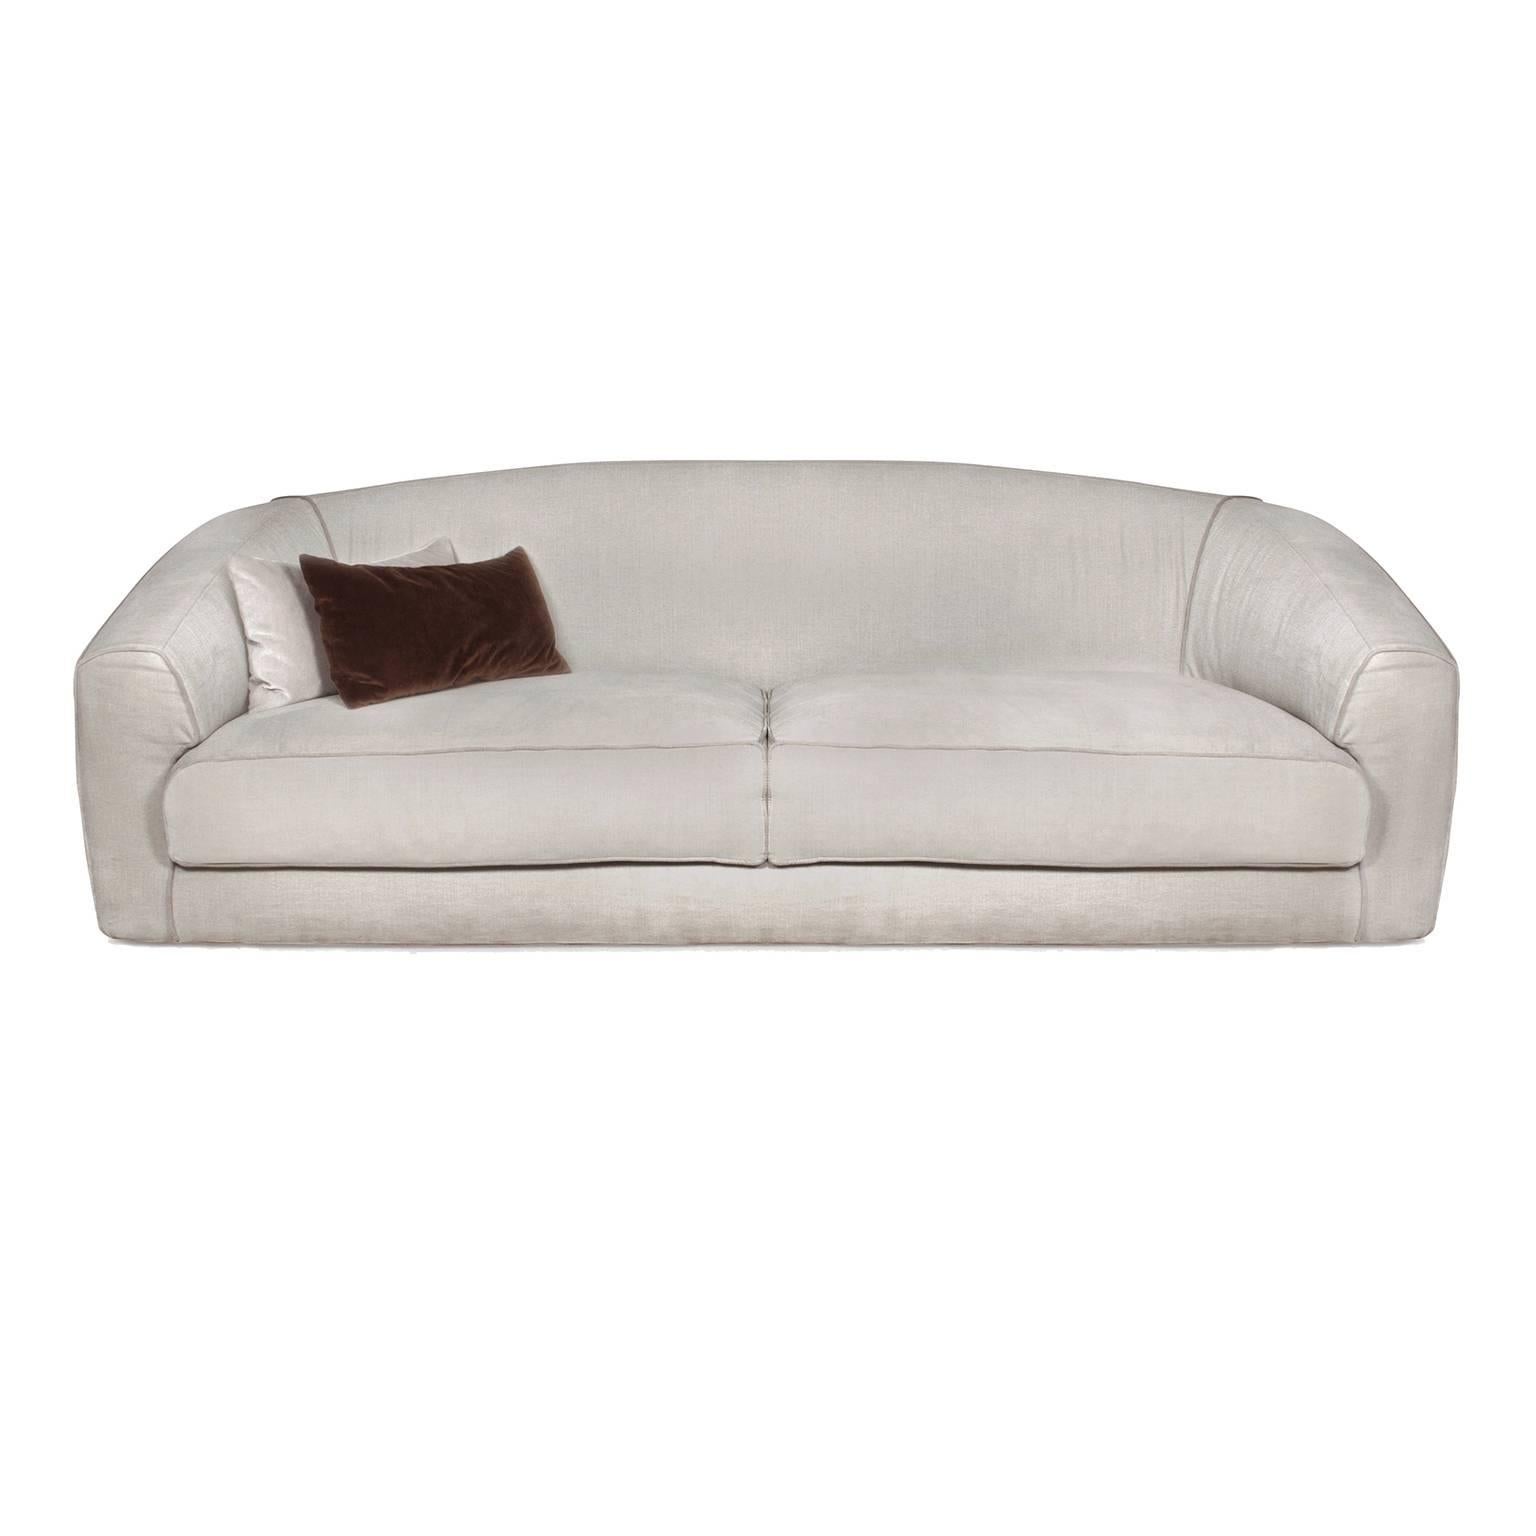 Mayfair Sofa with Cushions by Massimiliano Raggi for Casamilano, Italy For Sale